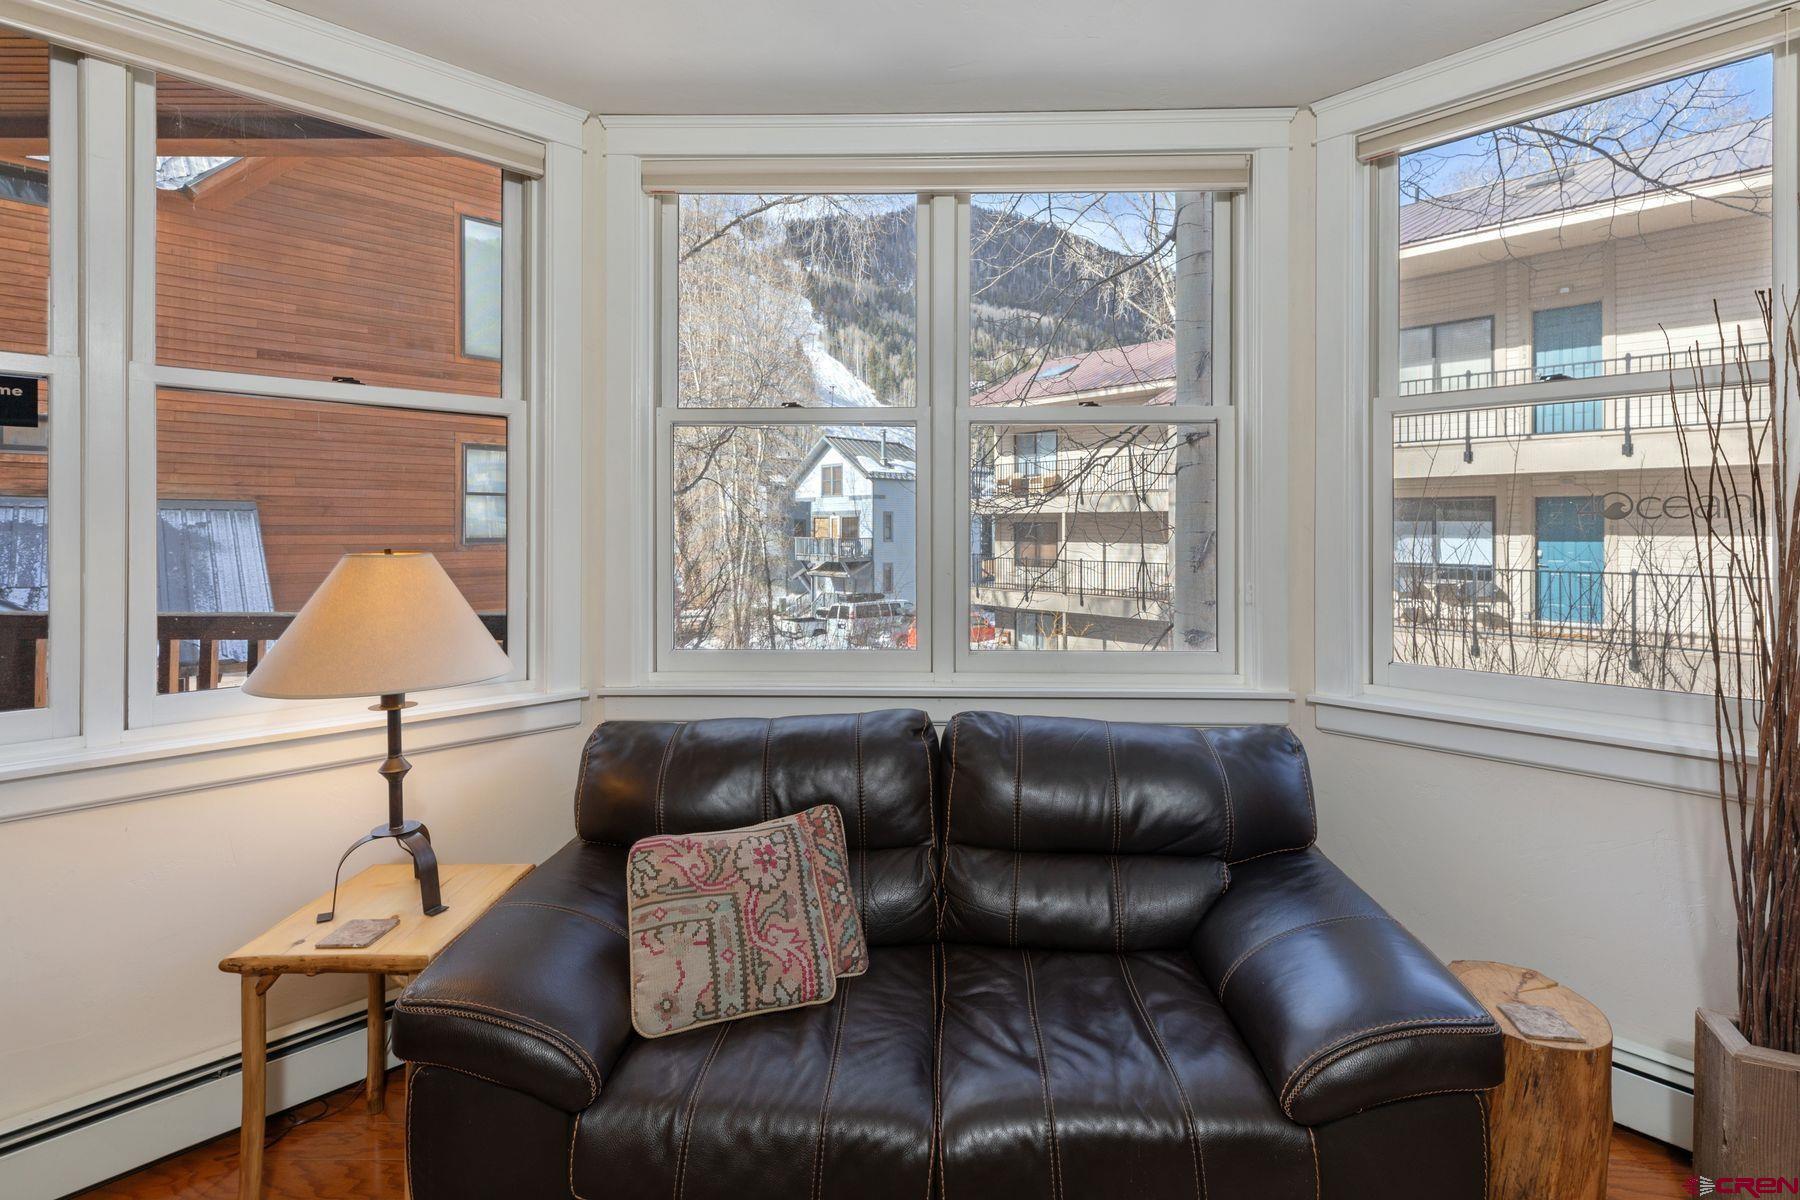 South Cornet Creek #403 is unique among its one-bedroom peers, with a sun-filled open floor plan and a one-car garage. Enjoy everything Historic Telluride has to offer - from world-class skiing to top-flight festivals - with this super clean gem that lives like a home. The bedroom and the full bath are spacious, and you can relax to the soothing sounds of Cornet Creek on the south-facing deck. The kitchen is finely appointed and the living spaces enjoy ample room for entertaining. Boasting views of Ajax Peak, Ingram Falls, and the ski trails descending to the valley floor. The unit has a washer/dryer, a generous owner closet, a ski locker, and a STR license. The comfortable spaces, the garage parking, and the easy access to all things Telluride have generated solid rental revenues.